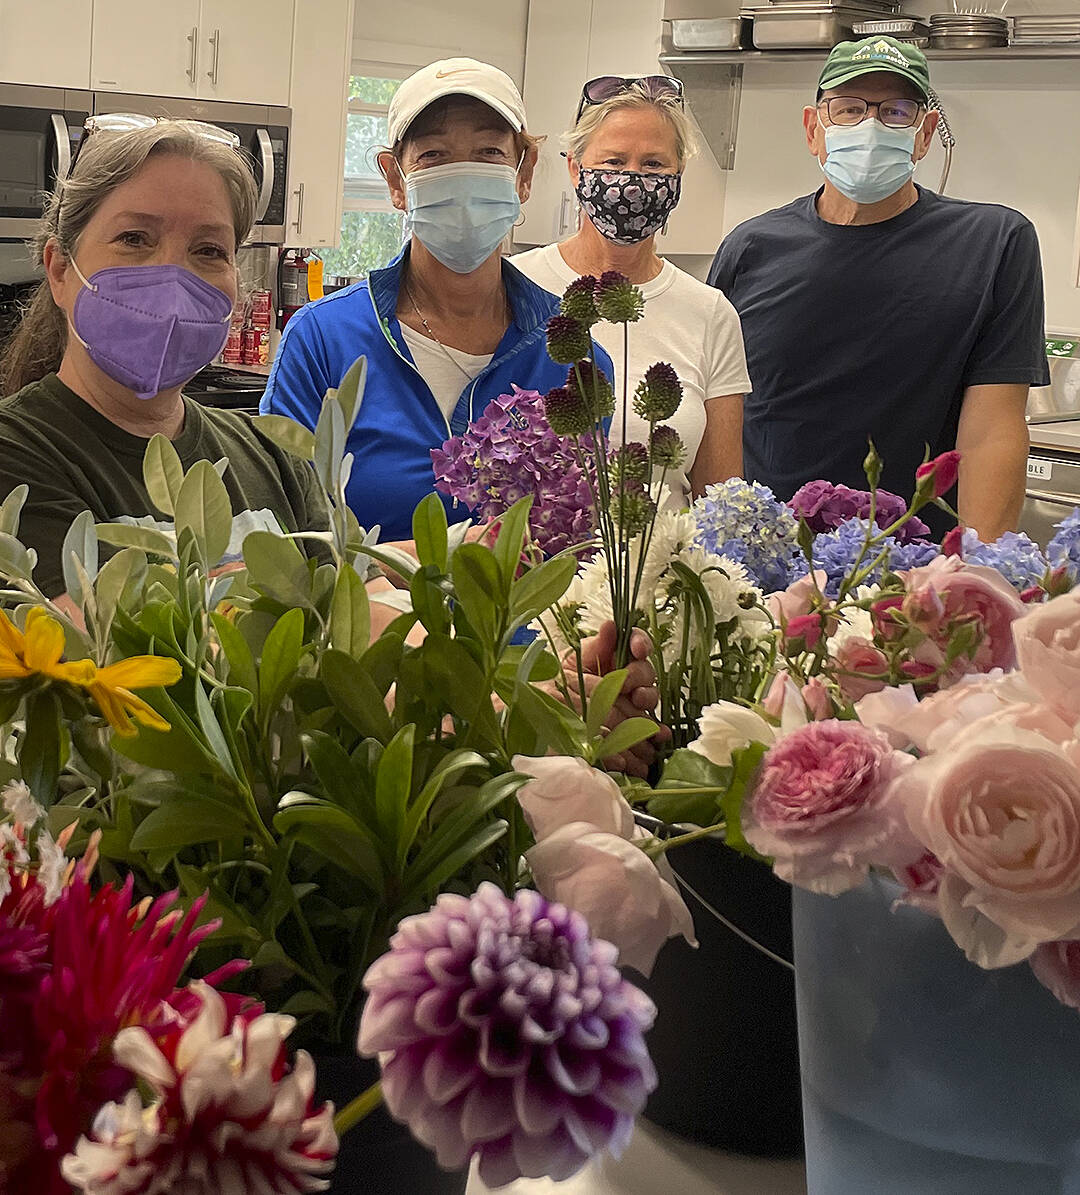 Courtesy Photo
Some of IVC’s flower crew.